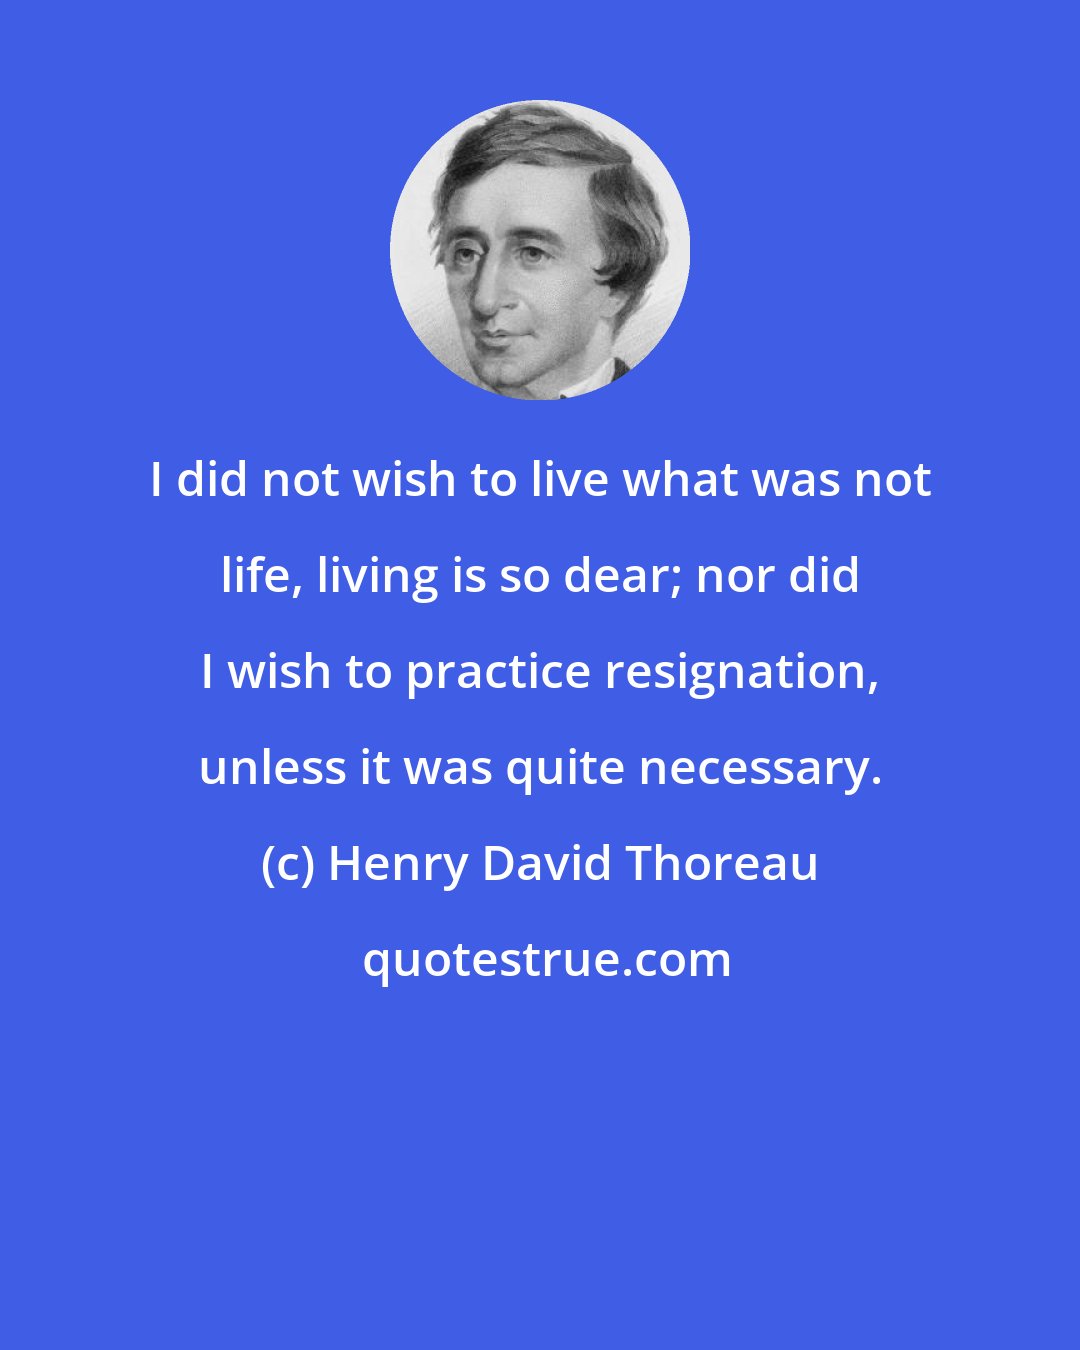 Henry David Thoreau: I did not wish to live what was not life, living is so dear; nor did I wish to practice resignation, unless it was quite necessary.